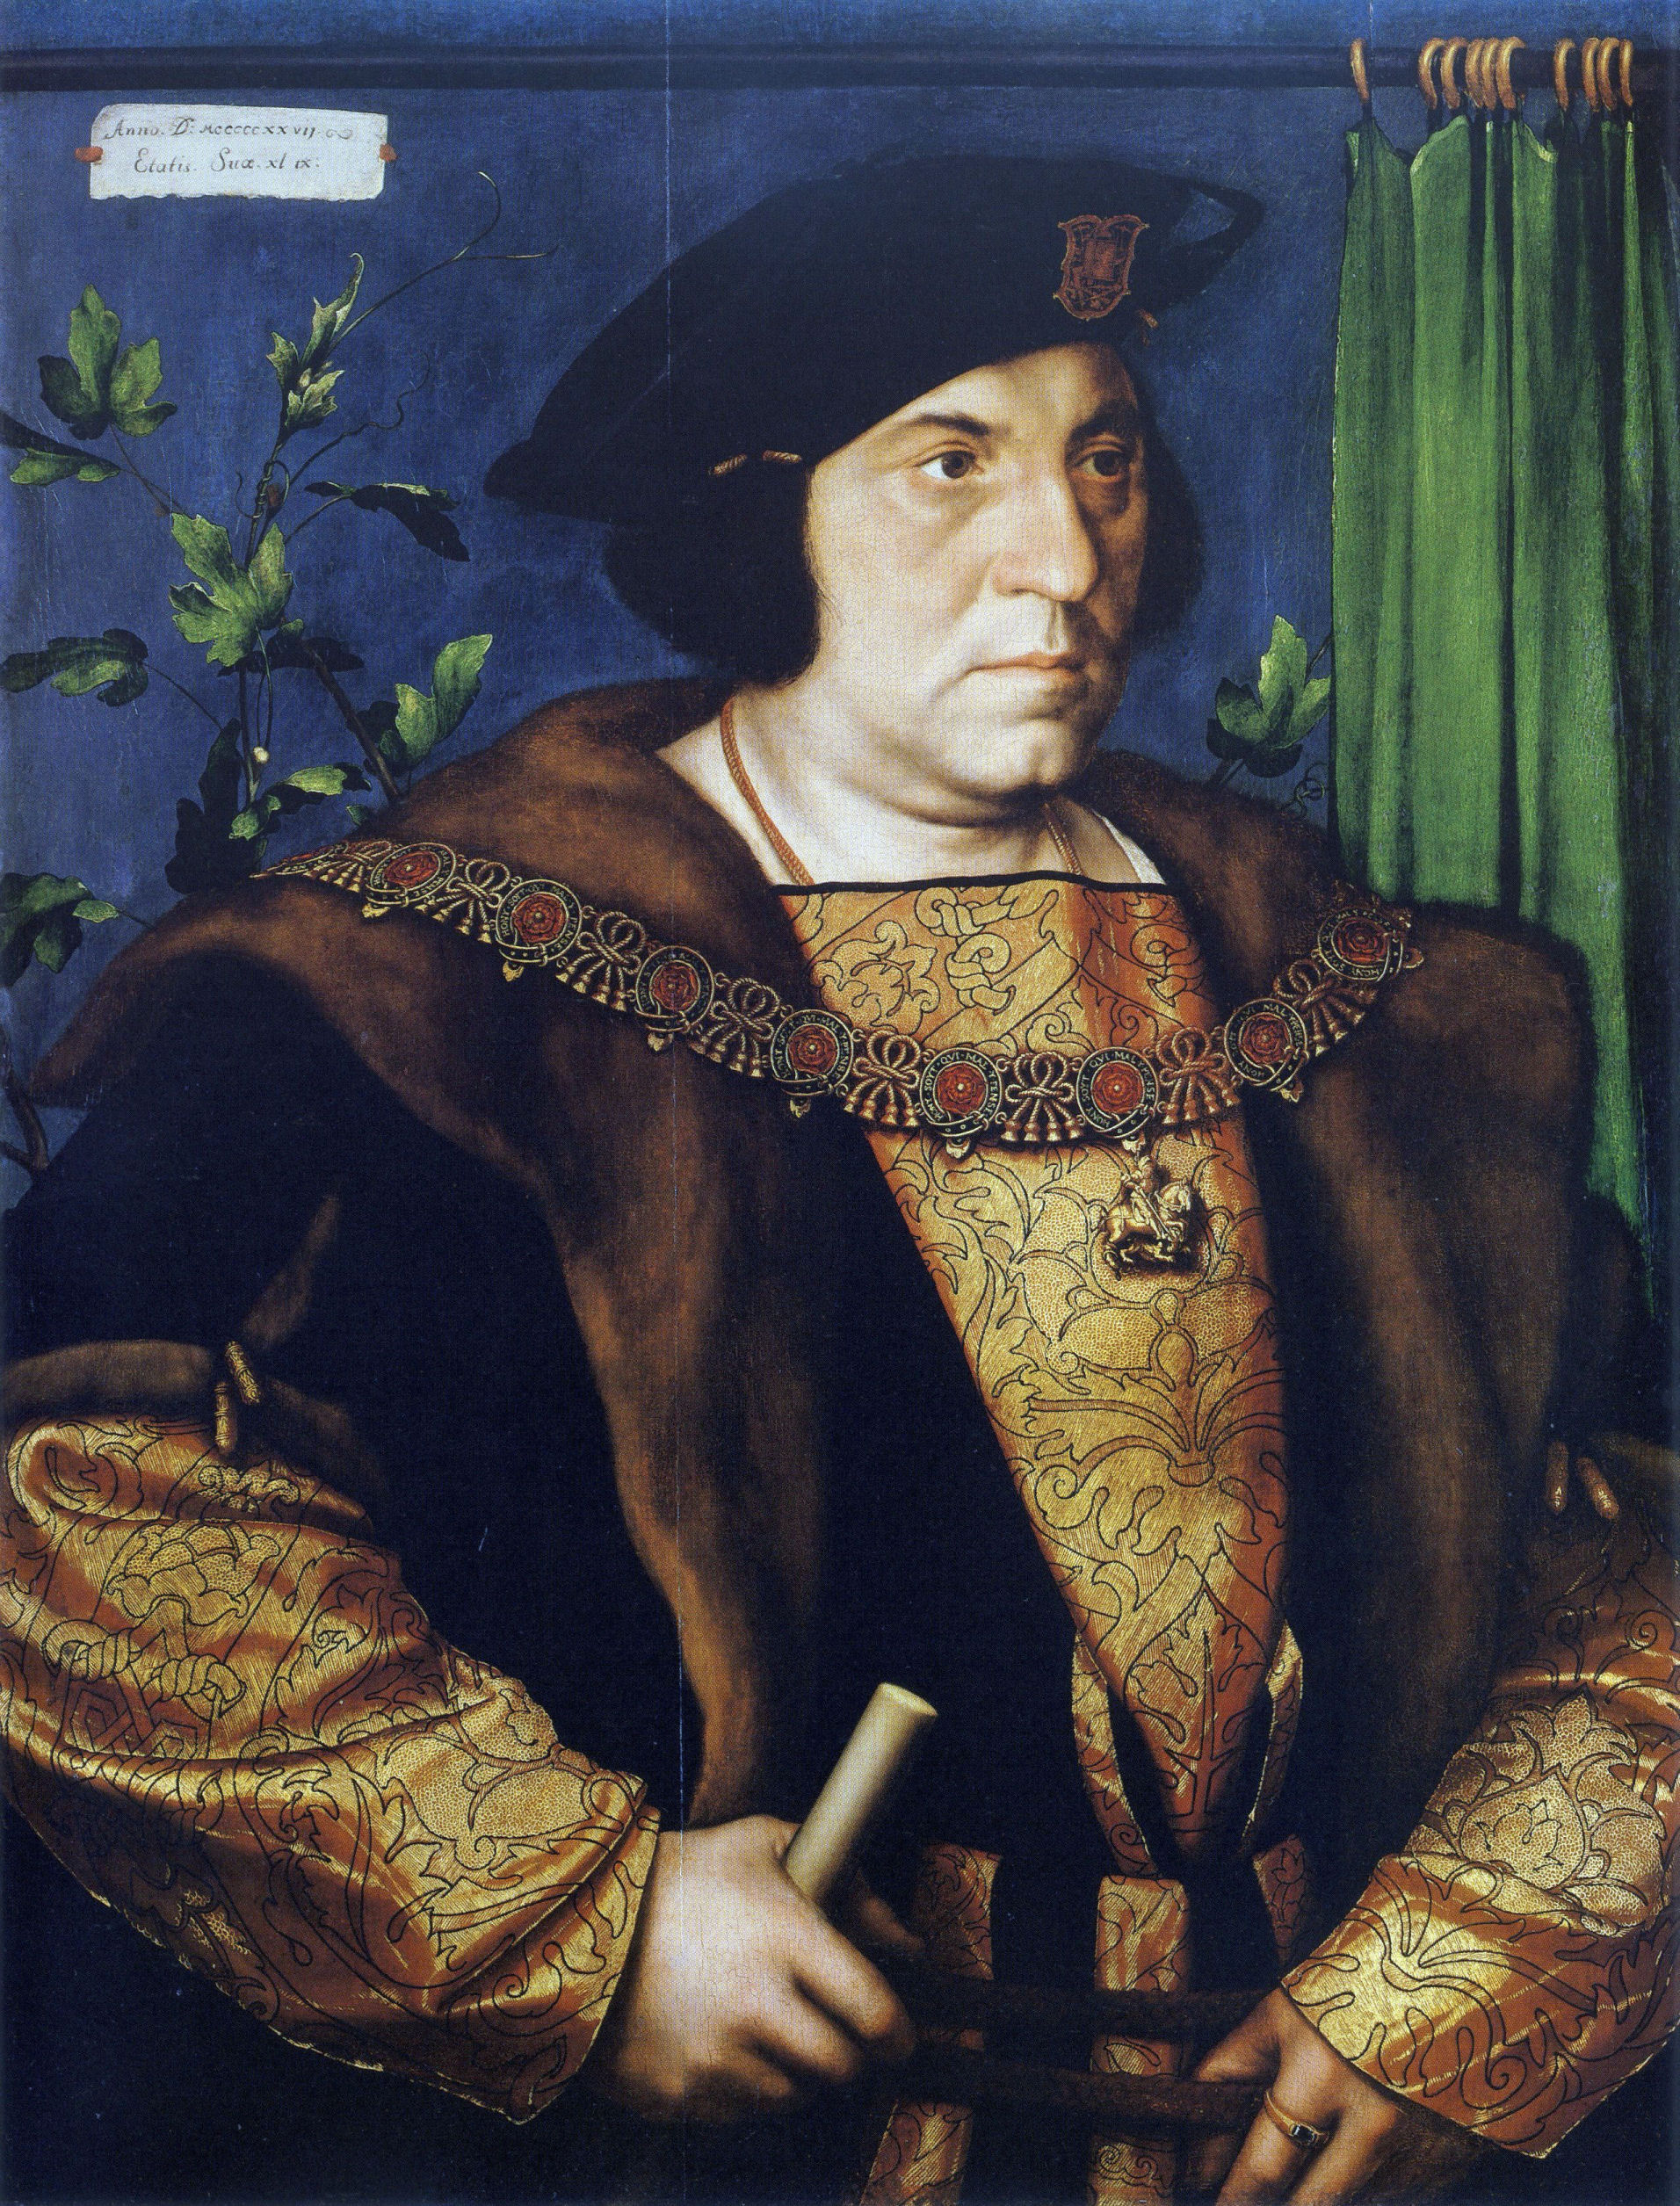 Sir Henry Guildford, by Hans Holbein the Younger